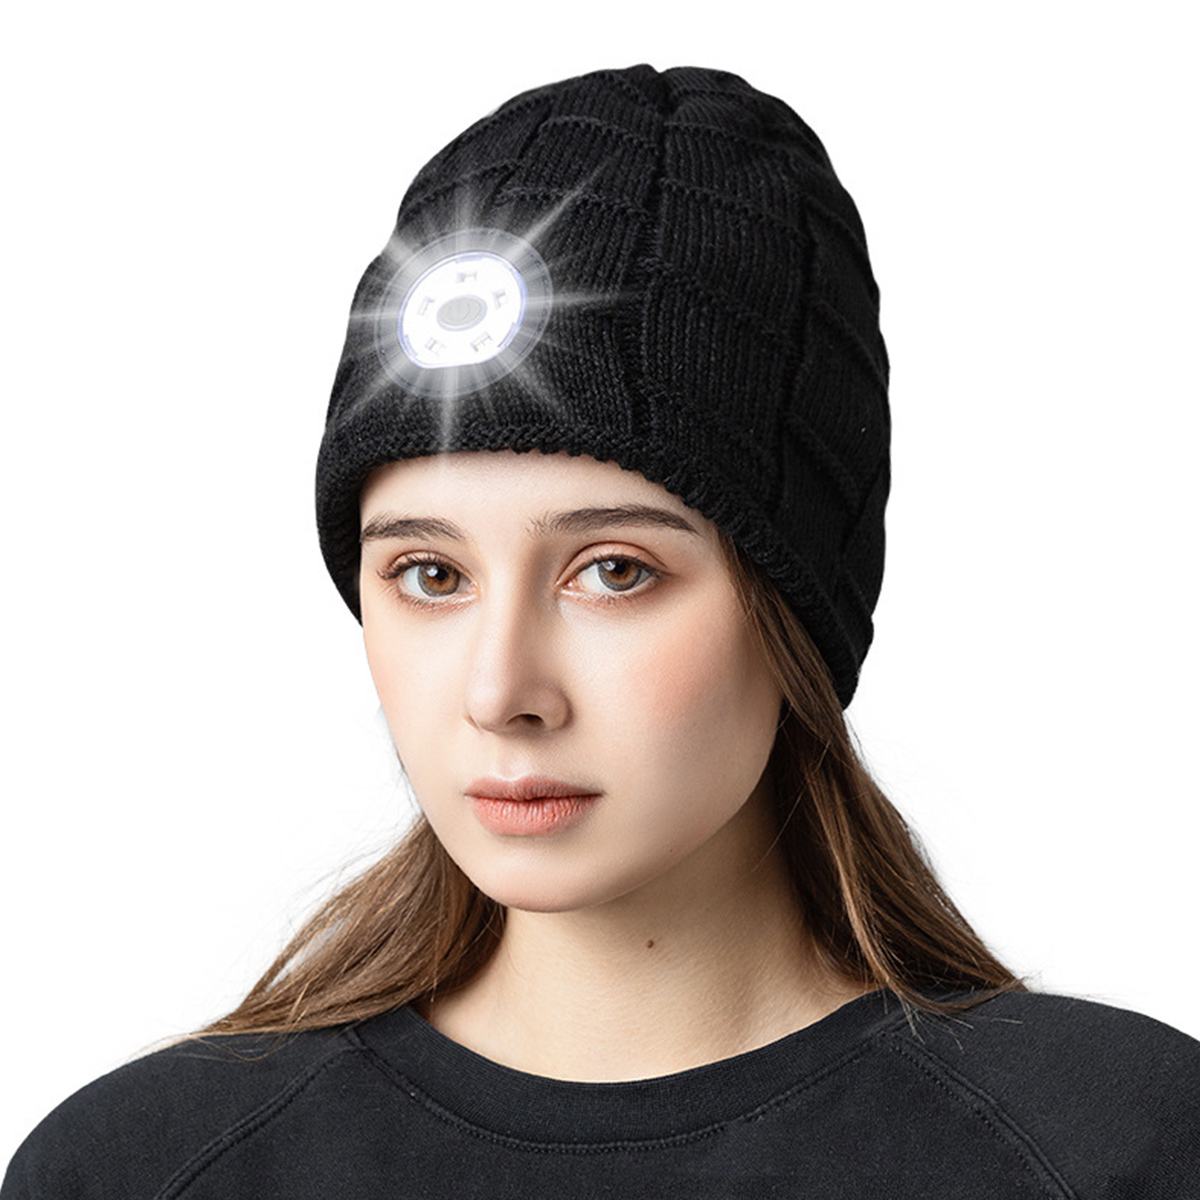 Tzgsonp Beanie Hat with Light Mens Gifts, Christmas Stocking Stuffers LED  Headlamp Lighted Hats Cap for Women Dad Teens